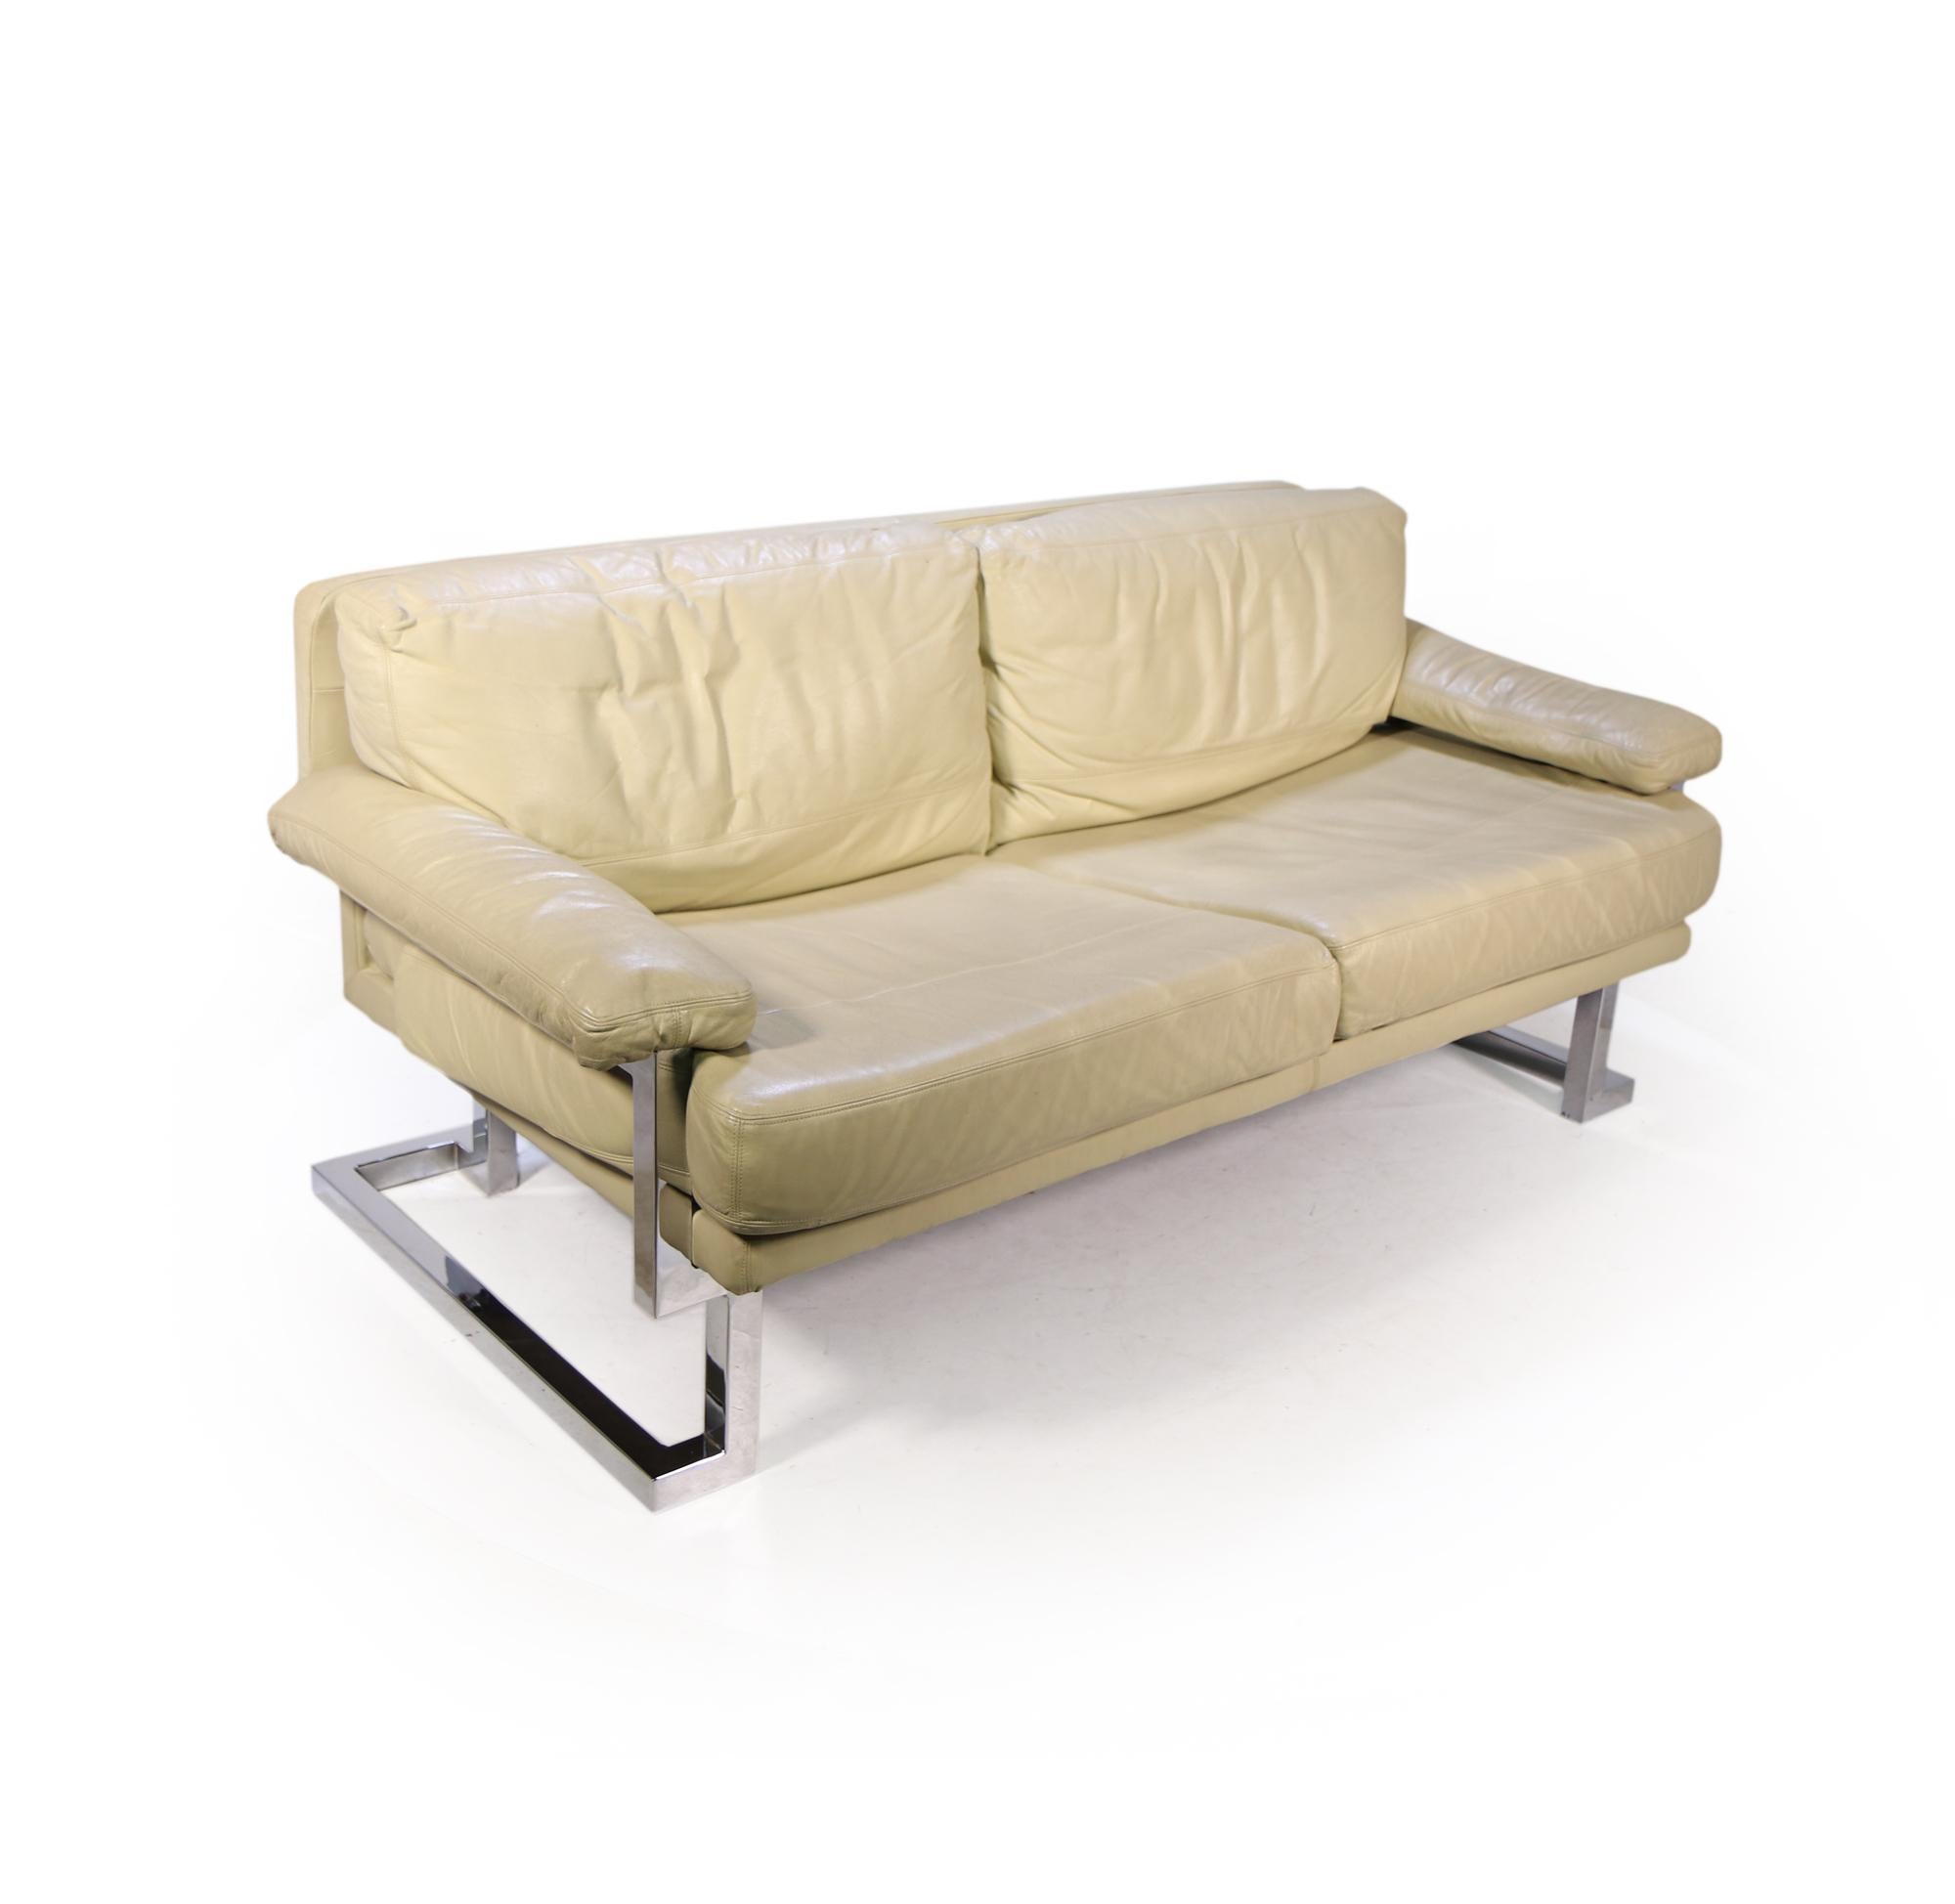 This iconic Mandarin sofa produced by Pieff features a chromed steel frame and cream leather upholstery, the sofa is in very good vintage original condition throughout, with no rips tears or repairs to the leather, and the chromed frame is alto in